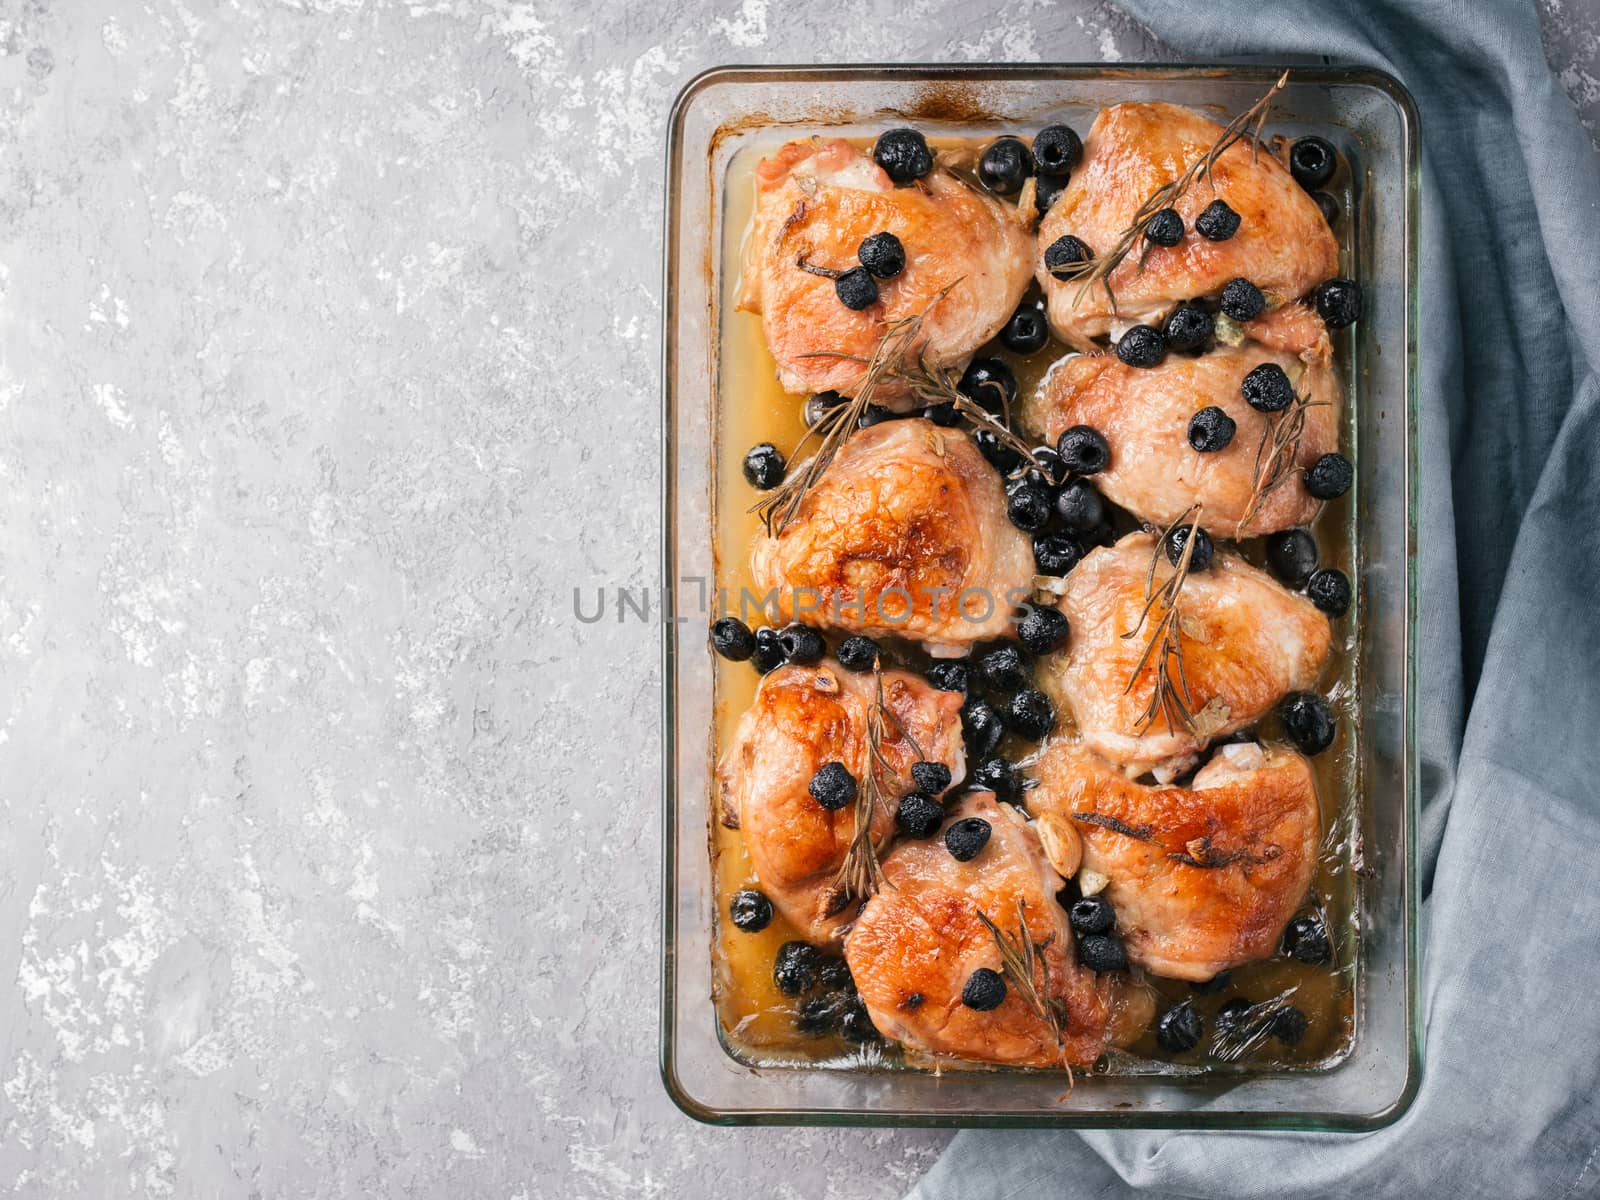 Corsican chicken thighs with rosemary, black olives, garlic in lemon juice and wine. Chicken legs cooked in oven on gray concrete background. Baked chicken leg in heat-proof glass. Top view.Copy space